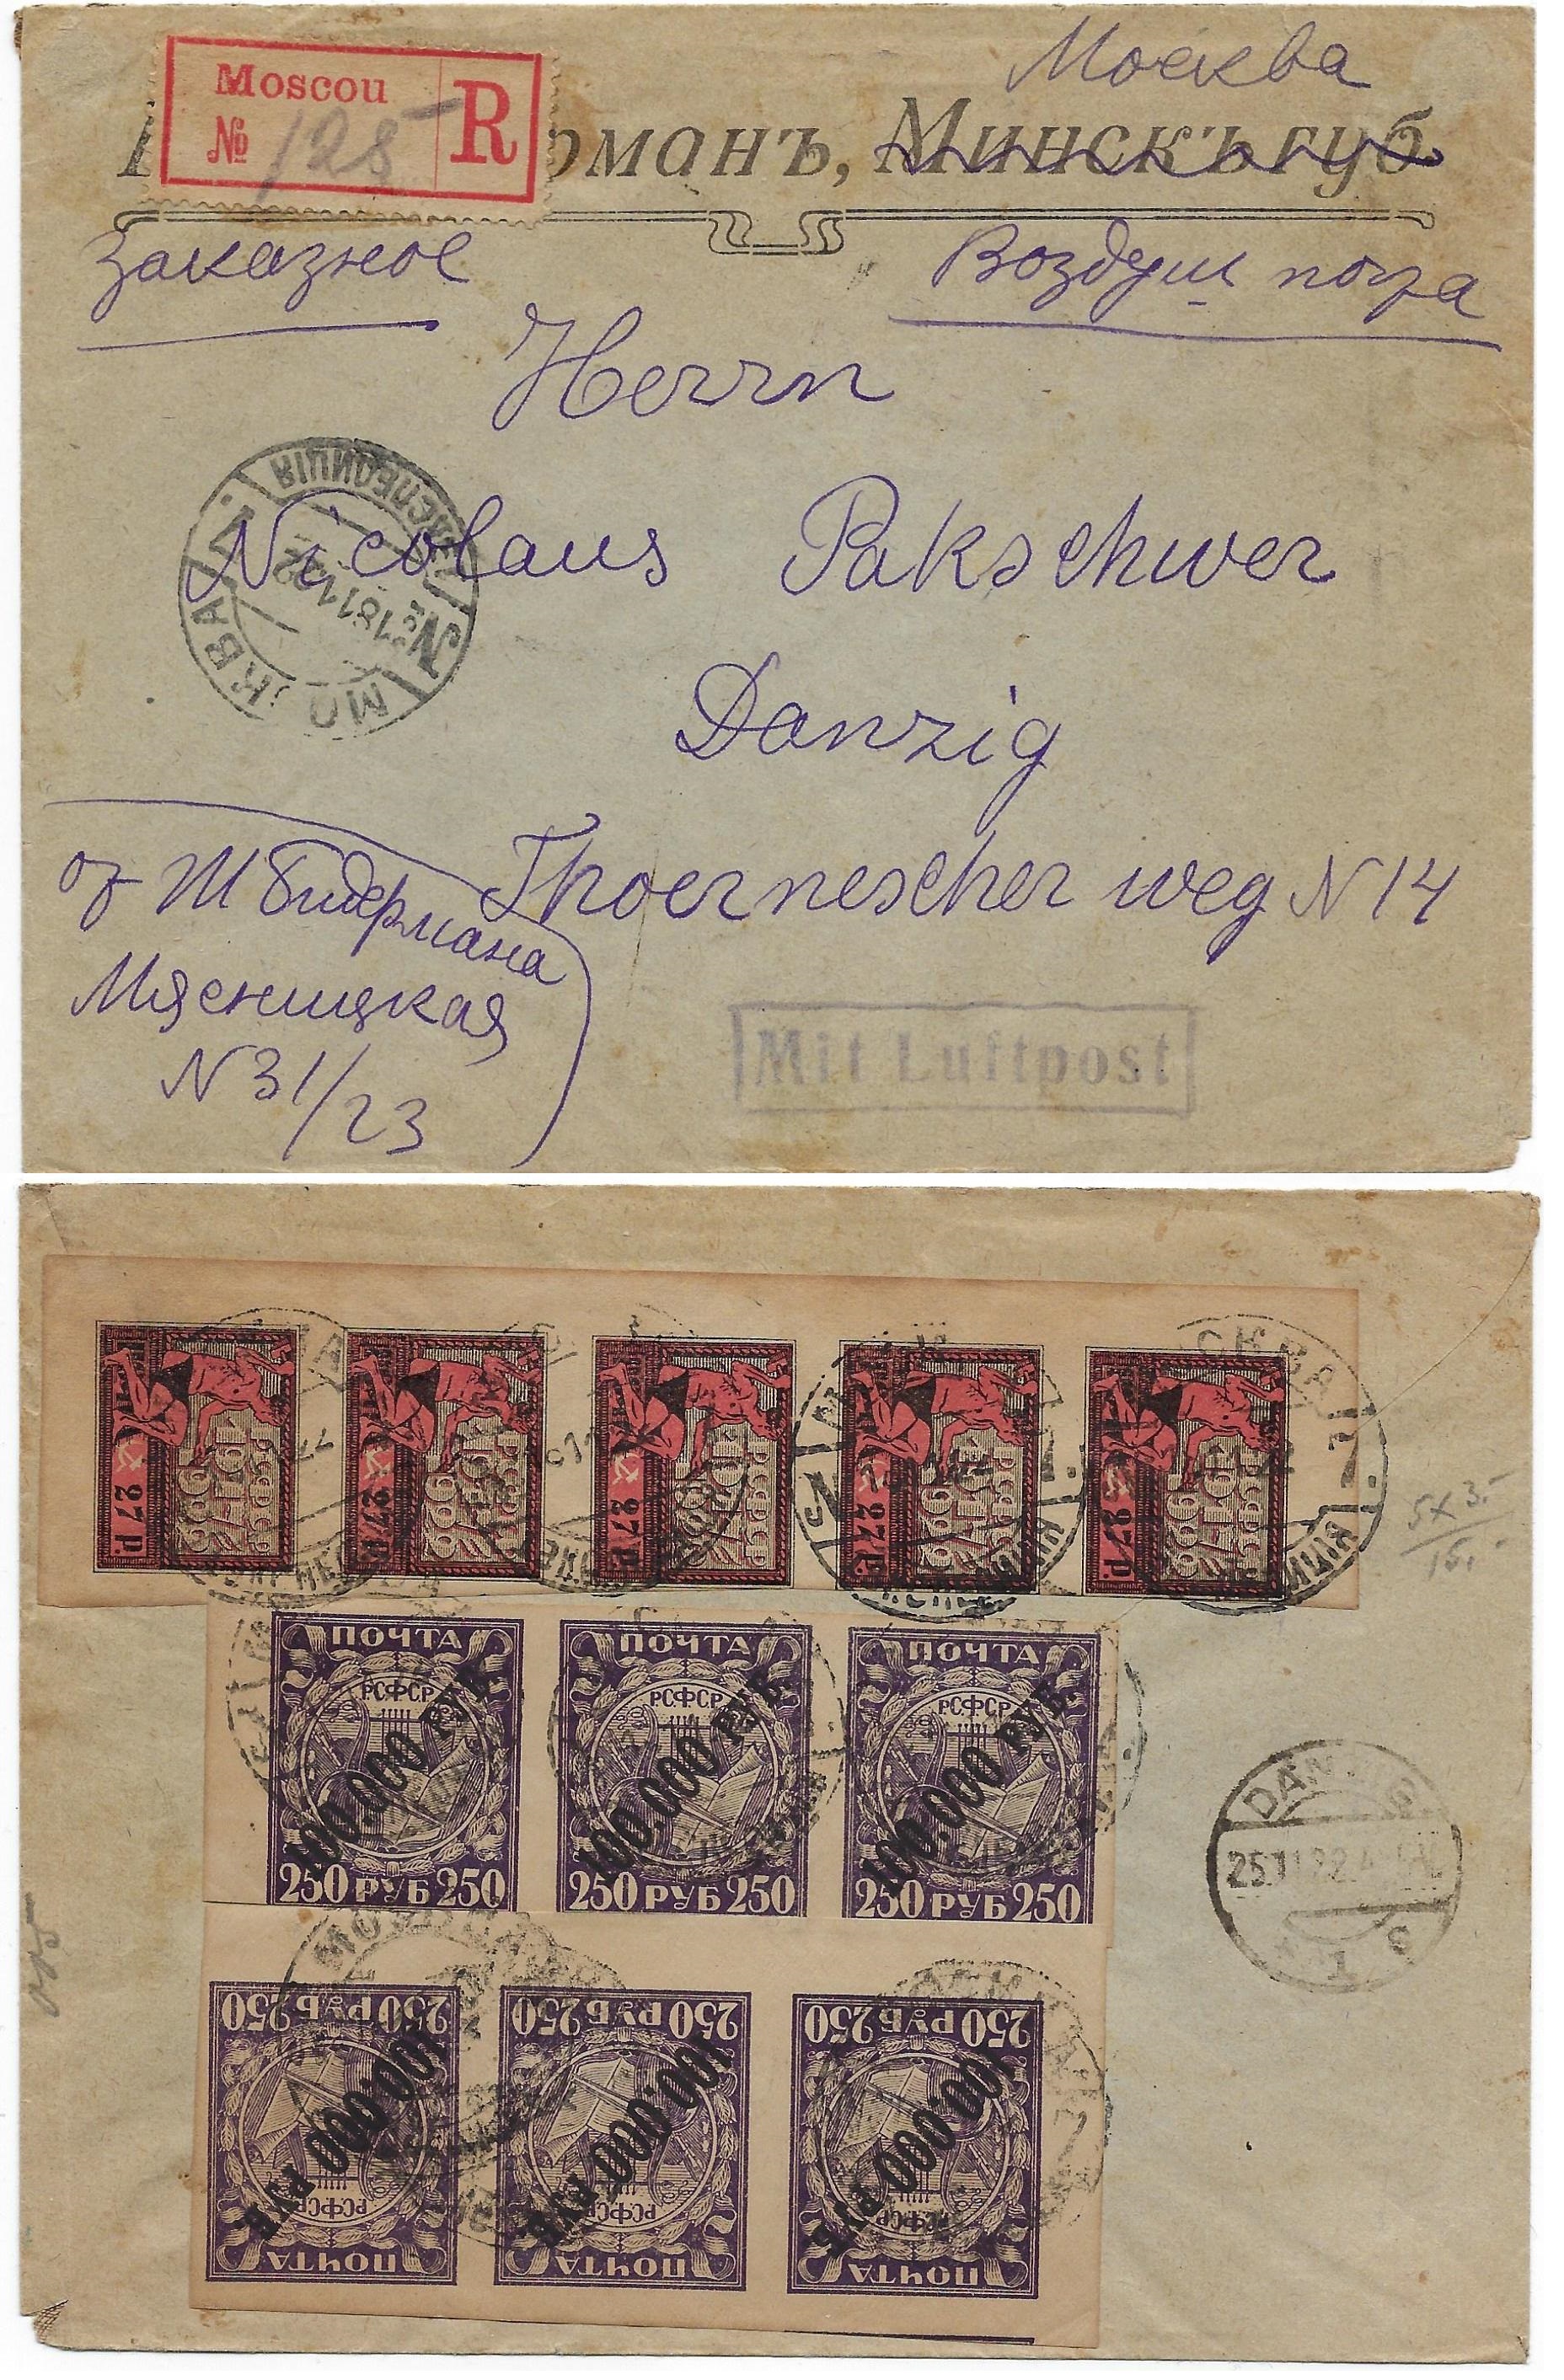 Russia Postal History - Airmails. Airmail covers Scott 1922 